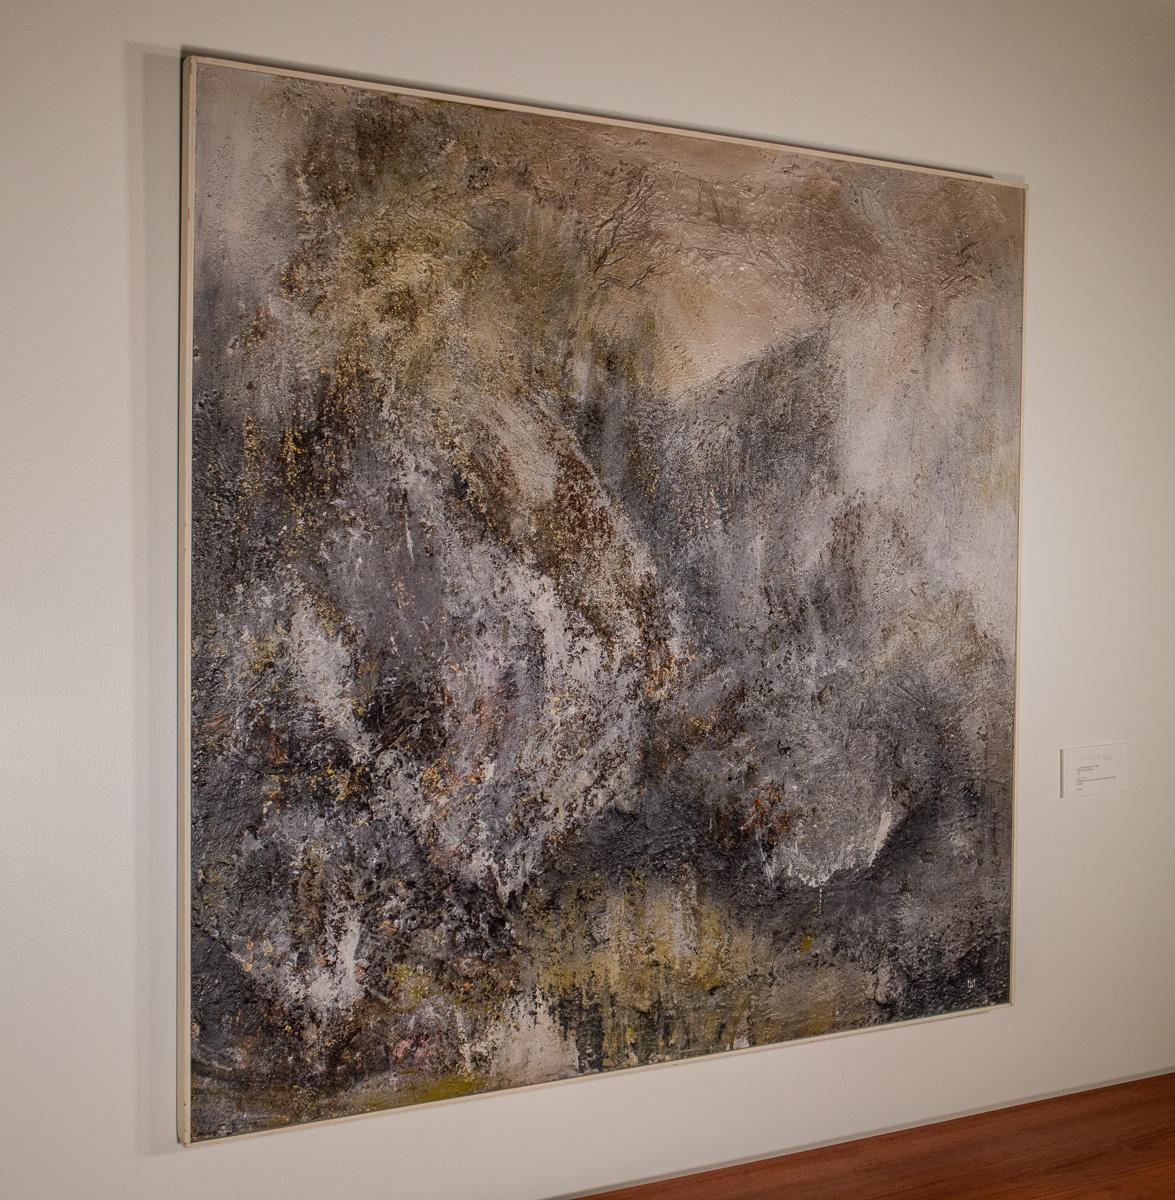 N. Lee Hirsche, “Mountain Storm”, 1961. Mixed Media, .OIl and Sand Impasto on Board. 

H. Lee Hirsche was born in New London, Connecticut, and studied under Josef Albers at the Yale School of Fine Arts. From 1954 to 1956 he taught basic design at